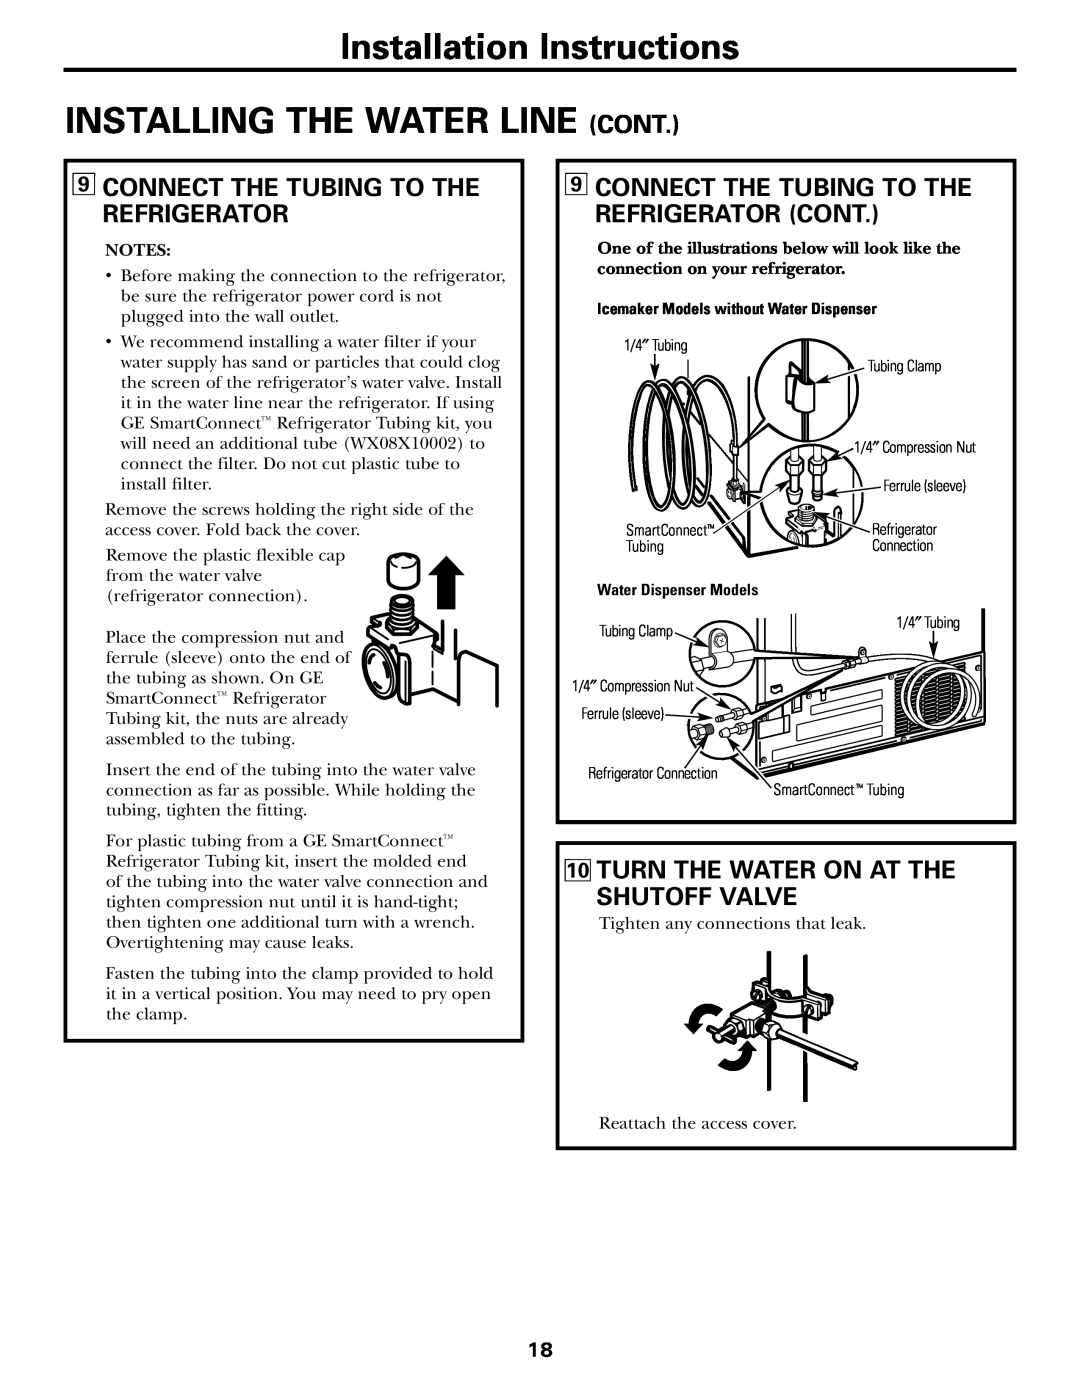 GE 18, 19 operating instructions Connect The Tubing To The Refrigerator Cont, Turn The Water On At The Shutoff Valve 